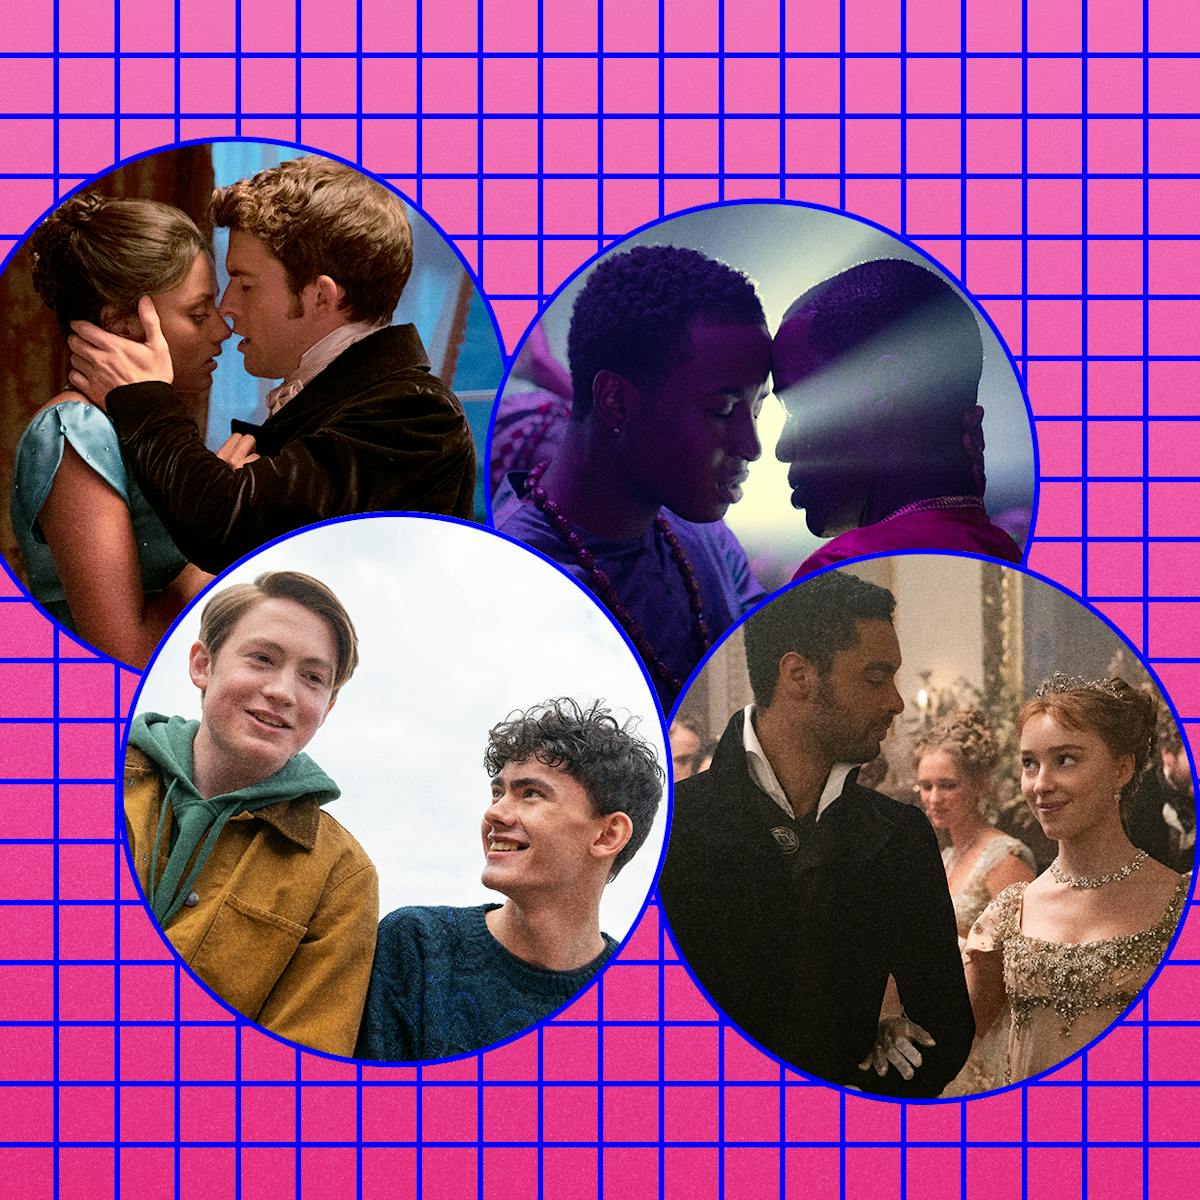 Four windows into some of Netflix's steamiest shows. From top left to bottom right Antony Bridgerton and Kate Sharma are tortured in a will-they-wont-they embrace in Bridgerton; Eric Effiong embraces Oba in a rave-lit shot in Sex Education; Heartstopper's Nick and Charlie smile and look giddy with a crush; another shot from Bridgerton shows Daphne and the Duke wake through a ball. 